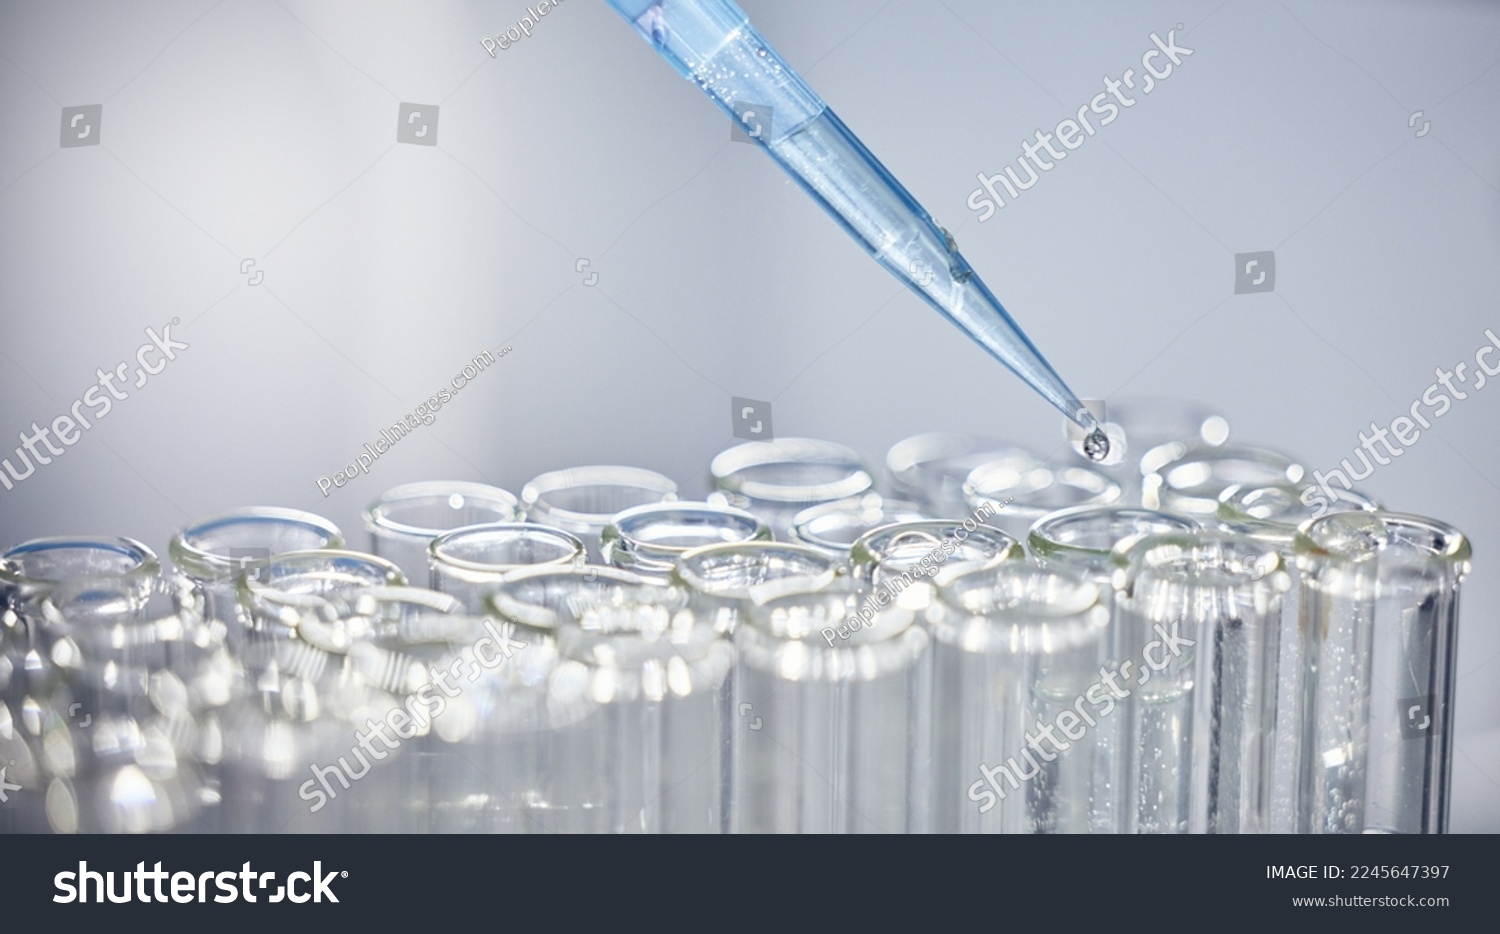 Science, test tubes and syringe for research, experiment or project in chemistry laboratory. Glass vials, innovation and chemical liquid for scientific innovation or analysis in a pharmaceutical lab. #2245647397